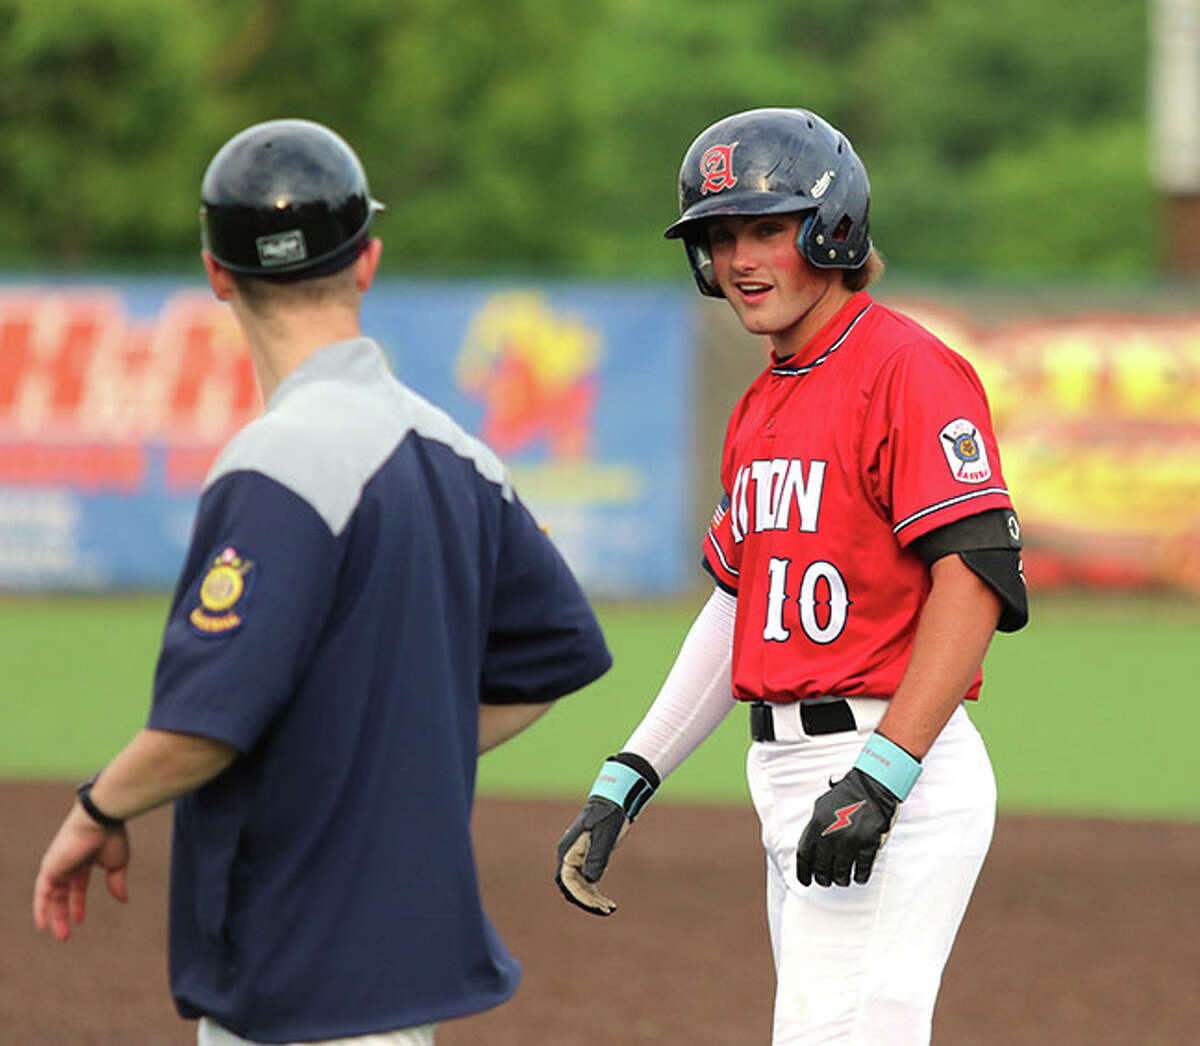 Alton's Hayden Sherman (right) talks with first base coach Chris Ford after reaching base in a game earlier this season in Alton. Post 126 was back at Hopkins Field on Tuesday night and shut out Troy Father McGivney 4-0.